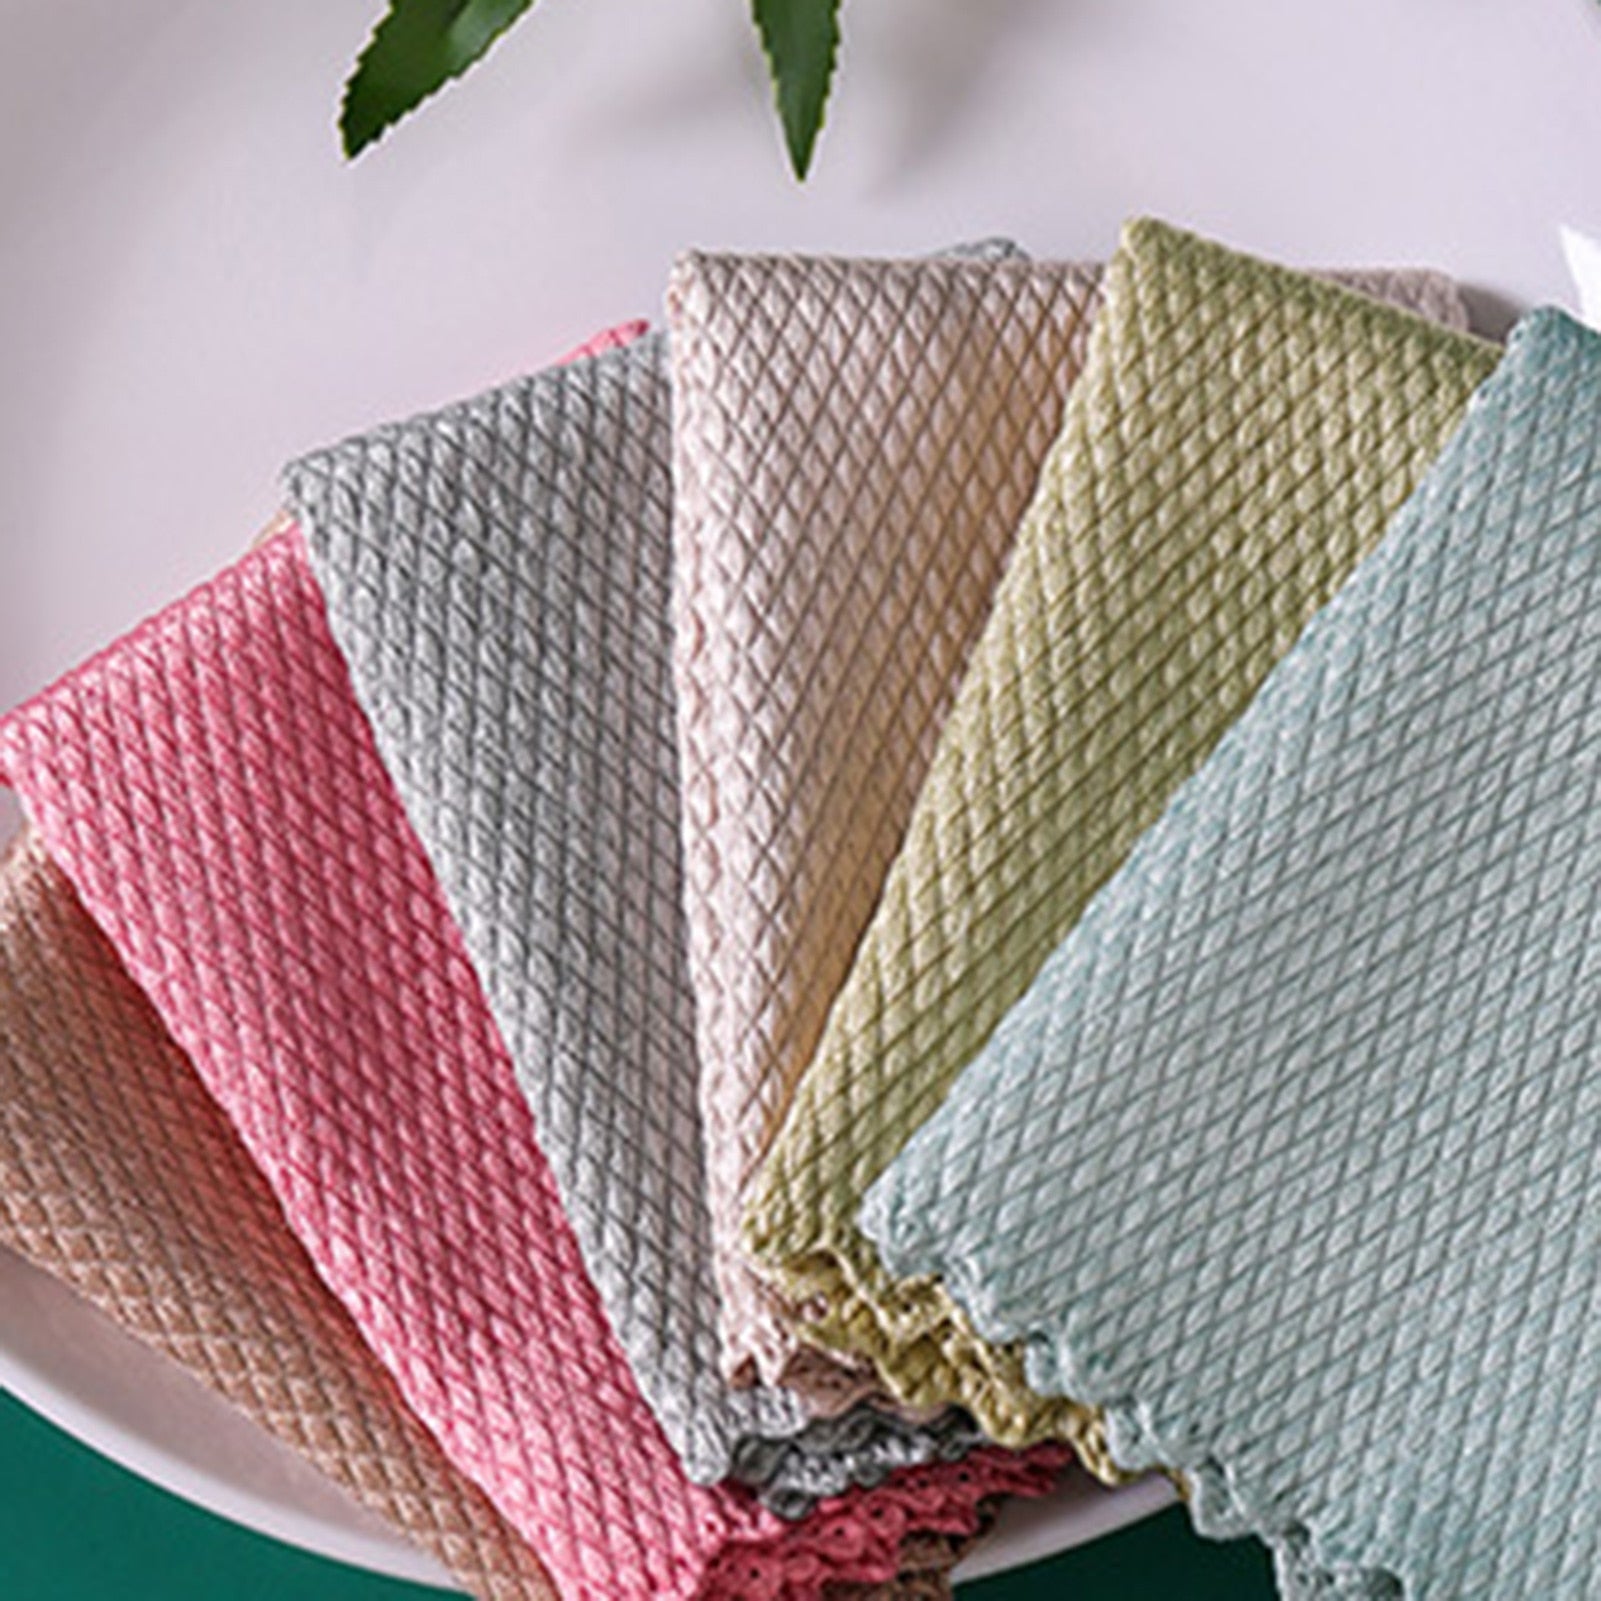 Five Fish Scale Nano Reusable Cleaning Cloths from MezoJaoie Wonder Lifestyle Store on a white plate.